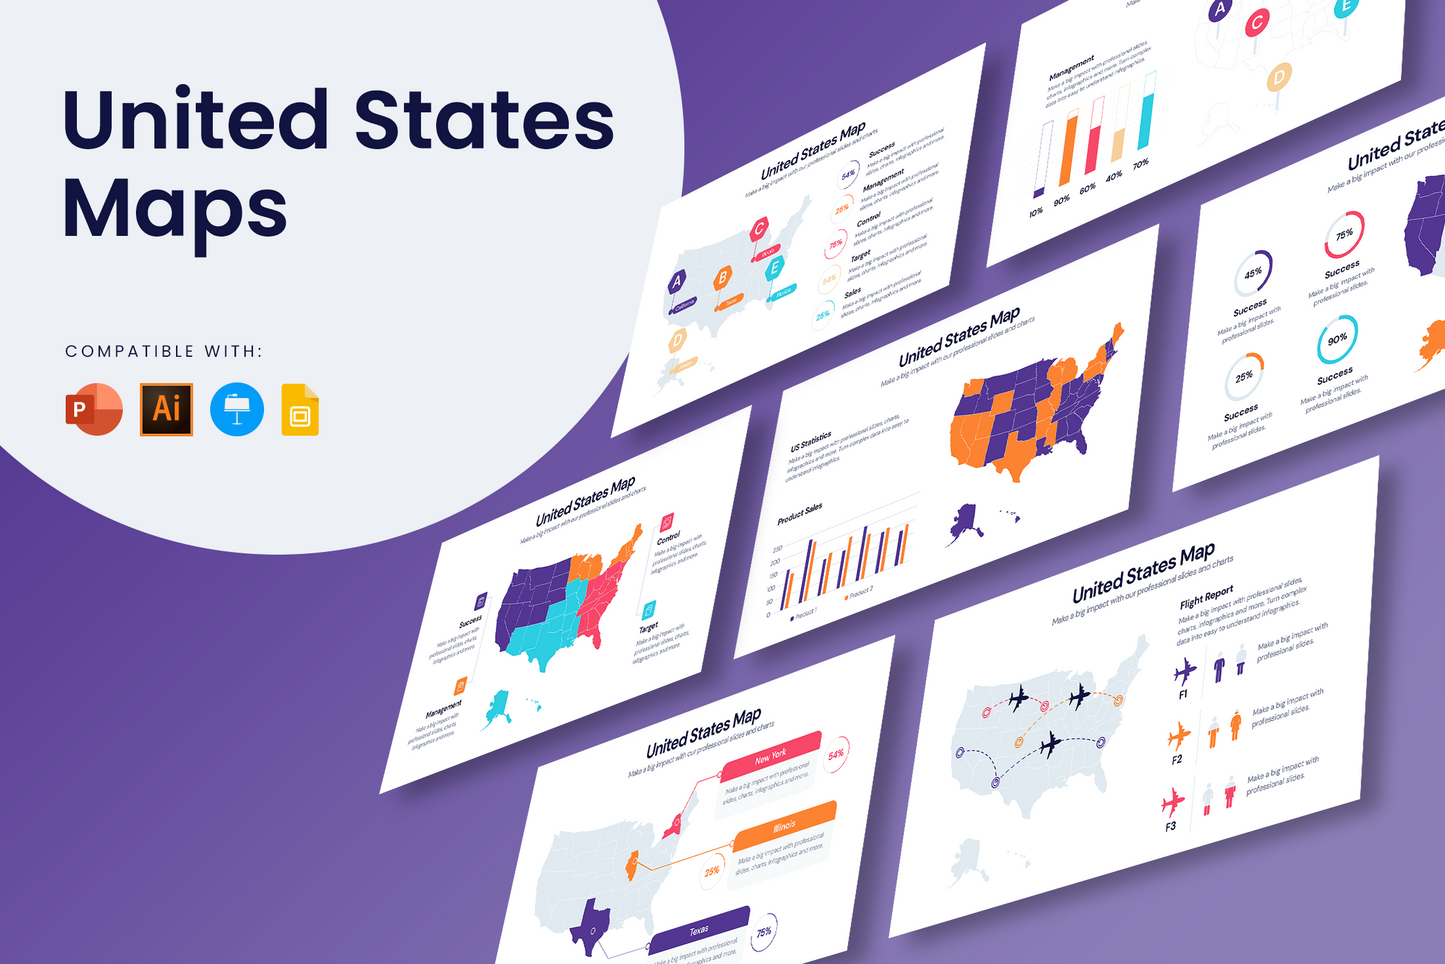 United States Map Infographic templates